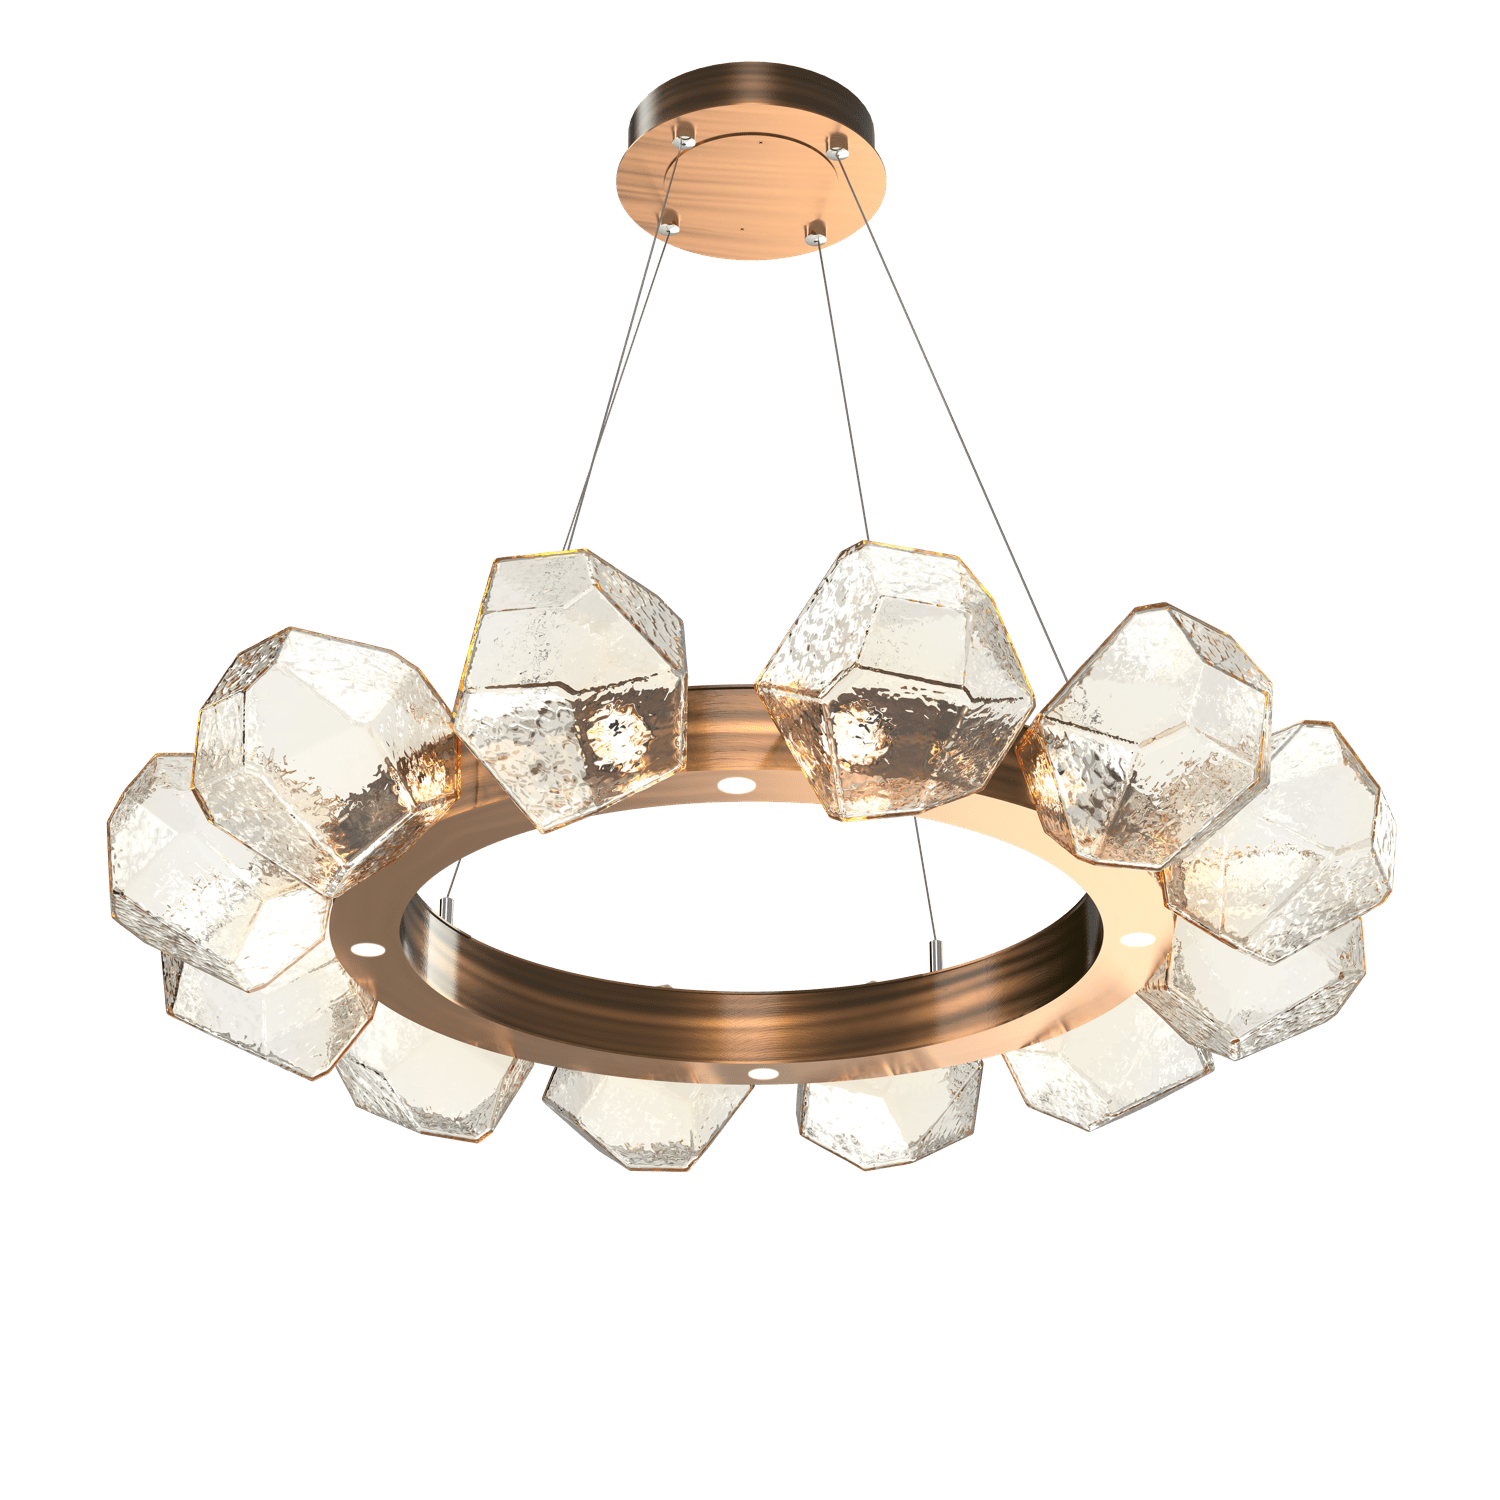 CHB0039-36-RB-A-Hammerton-Studio-Gem-36-inch-radial-ring-chandelier-with-oil-rubbed-bronze-finish-and-amber-blown-glass-shades-and-LED-lamping